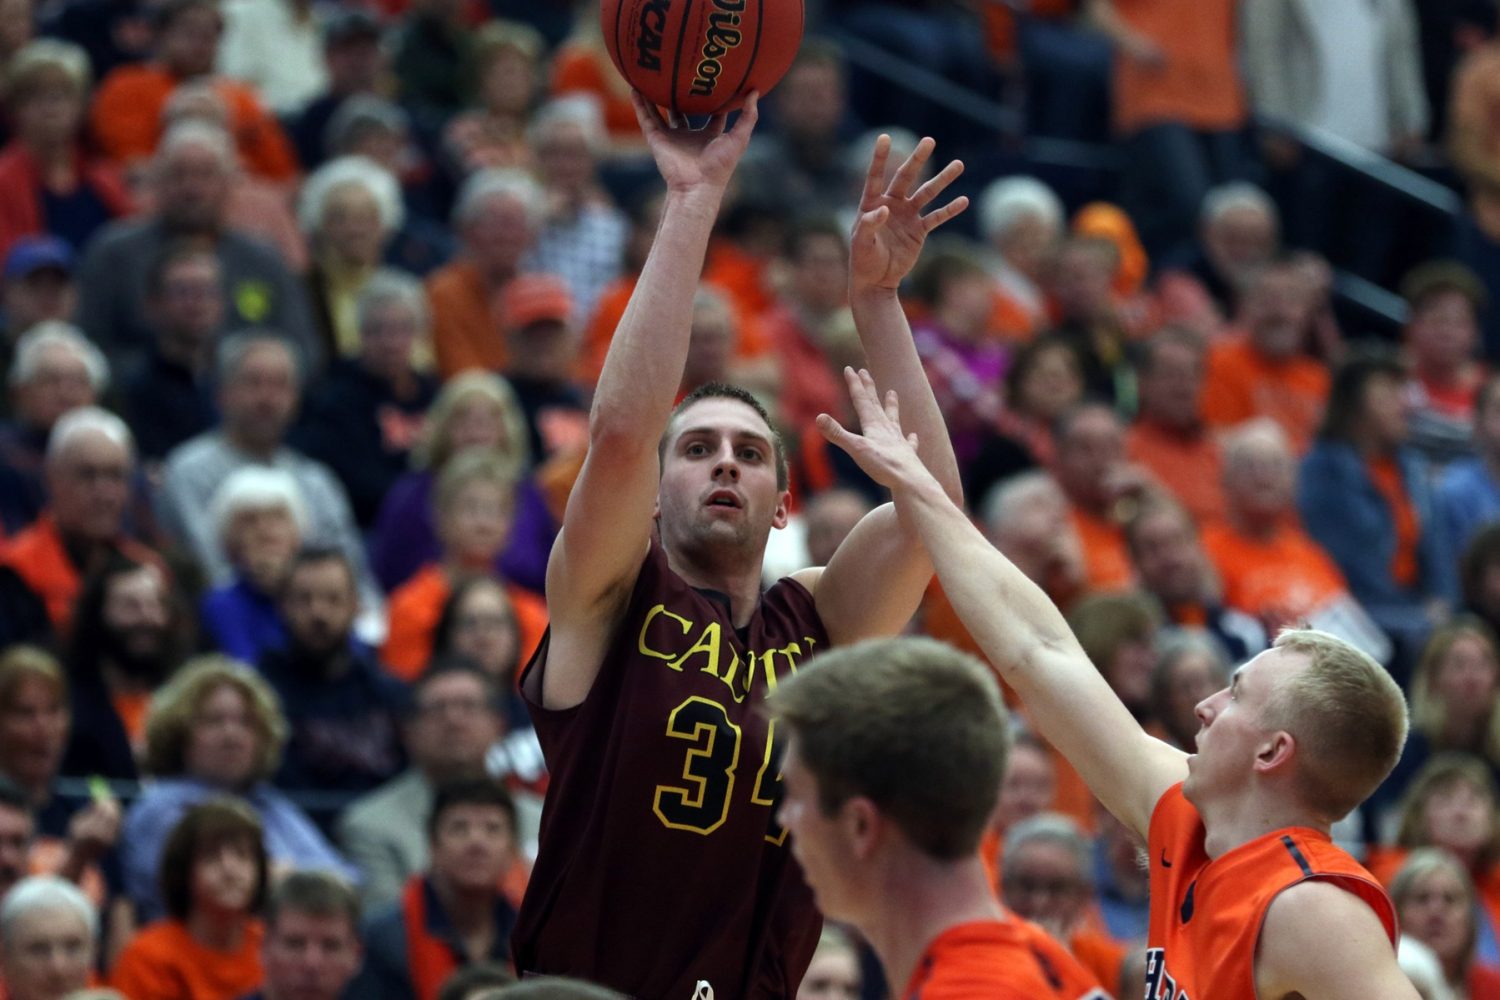 Mike Siegel (34) scored a game high 20 points coming off the bench. Photo courtesy Calvin Sports Information.